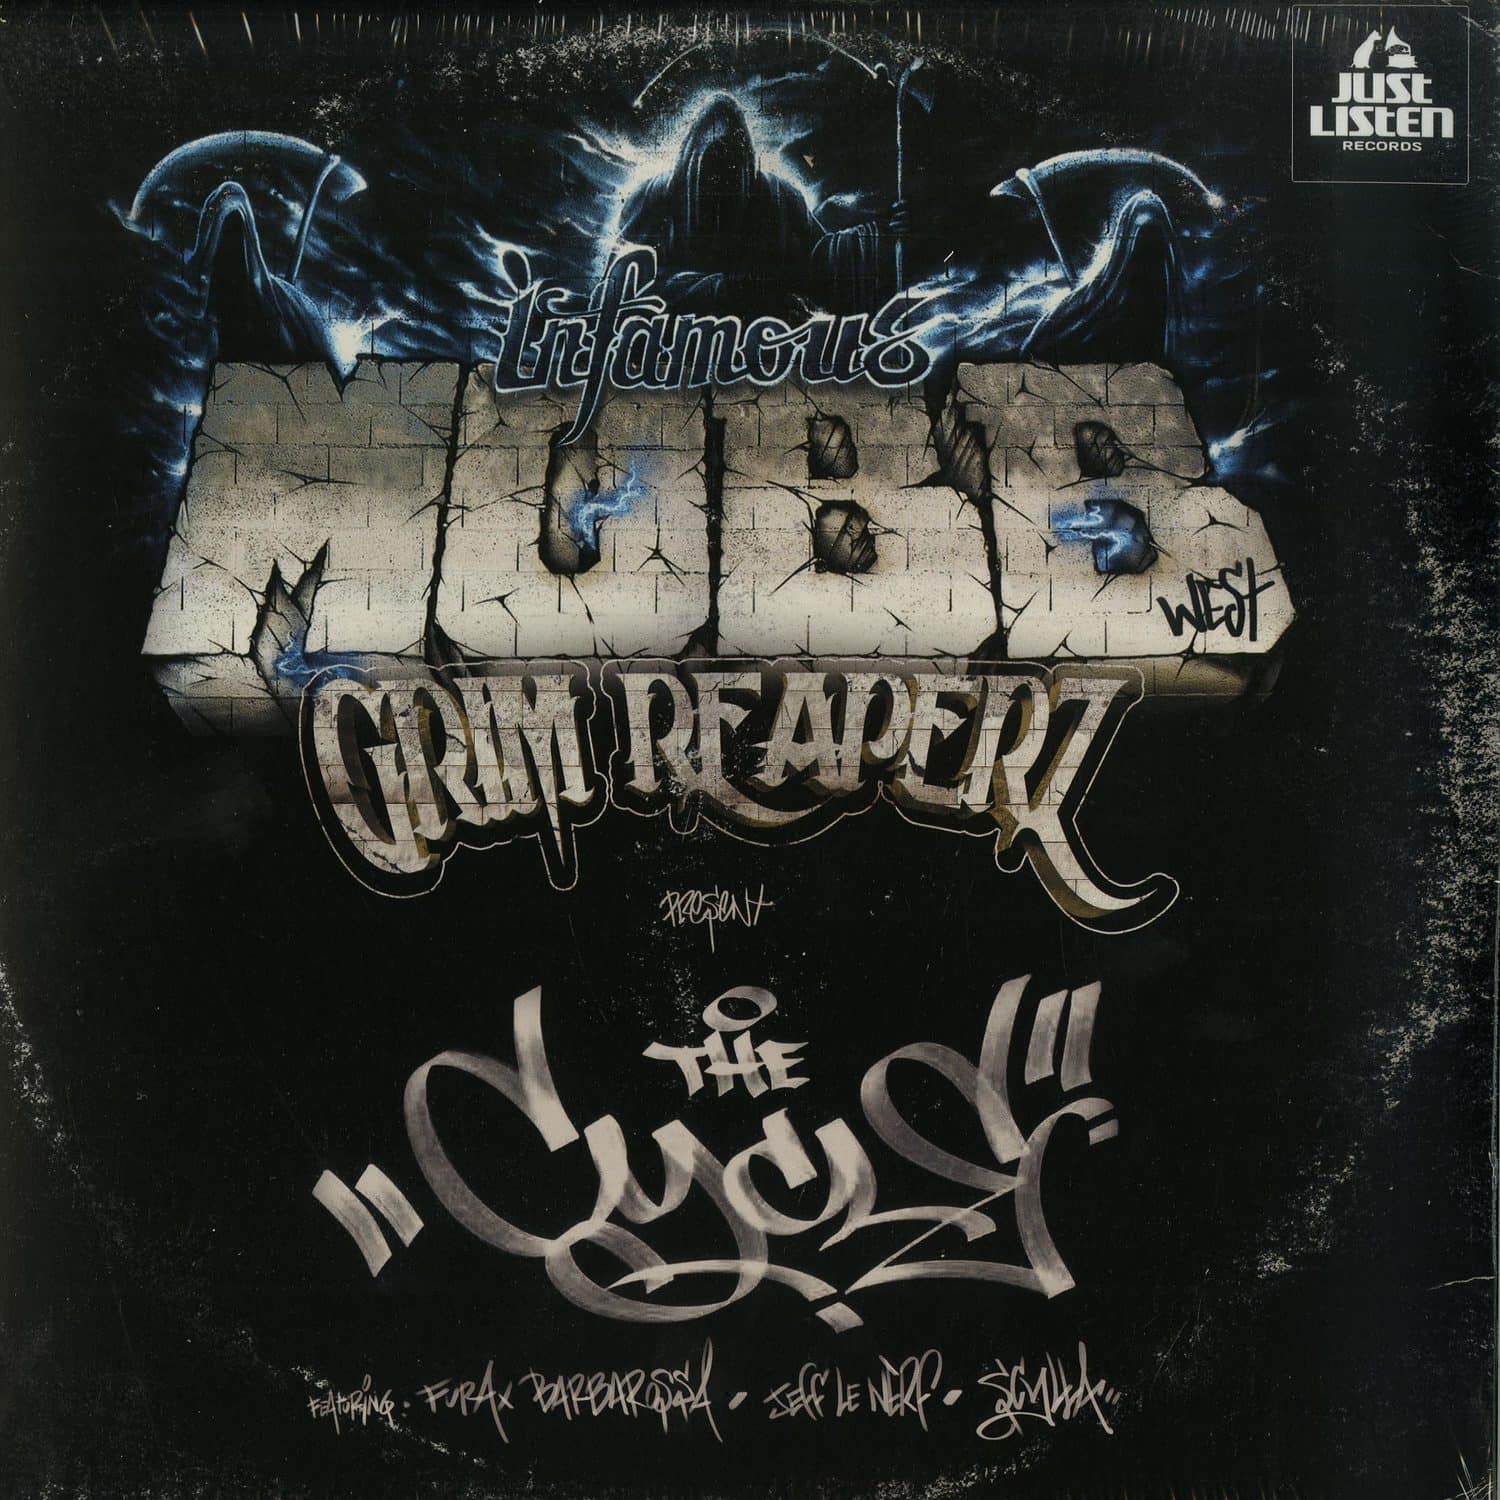 Infamous Mobb West & Grim Reaperz - THE CYCLE EP